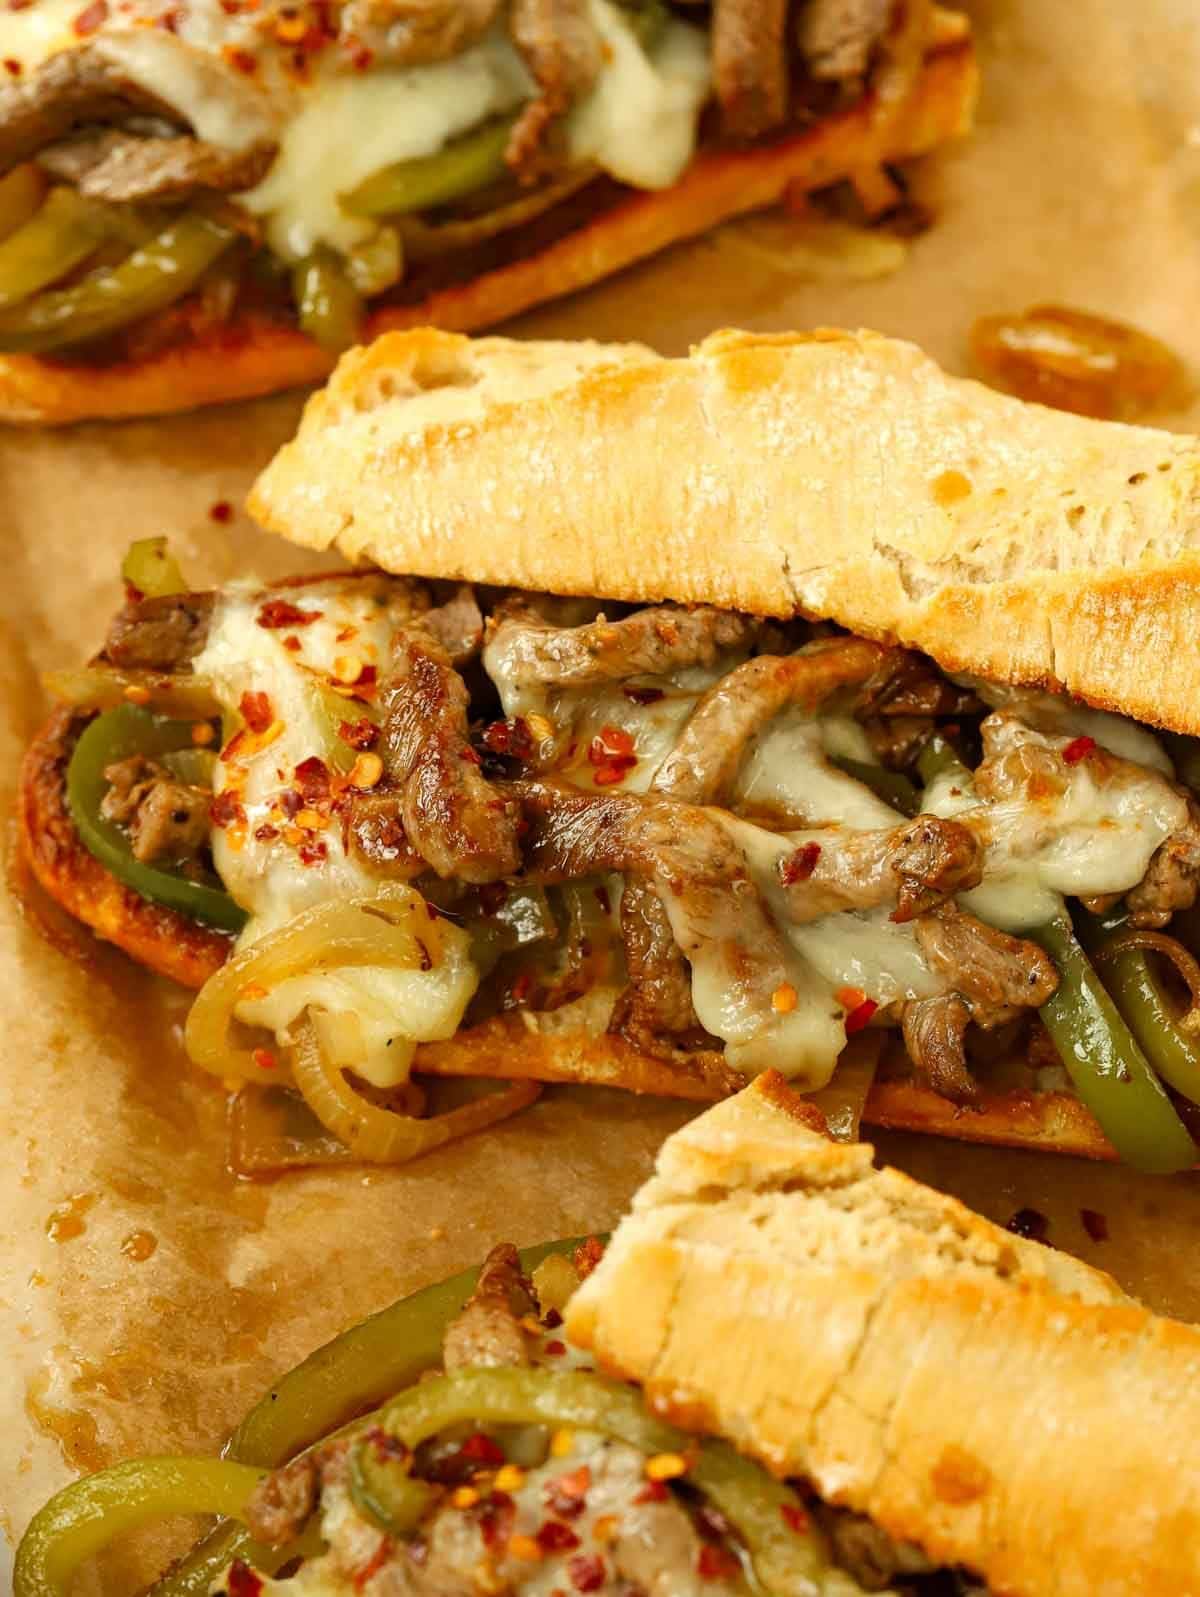 A closer look at the filling of a Philly Cheesesteak in a baguette. Steak, cheese, veggies and a sprinkle of chilli flakes.